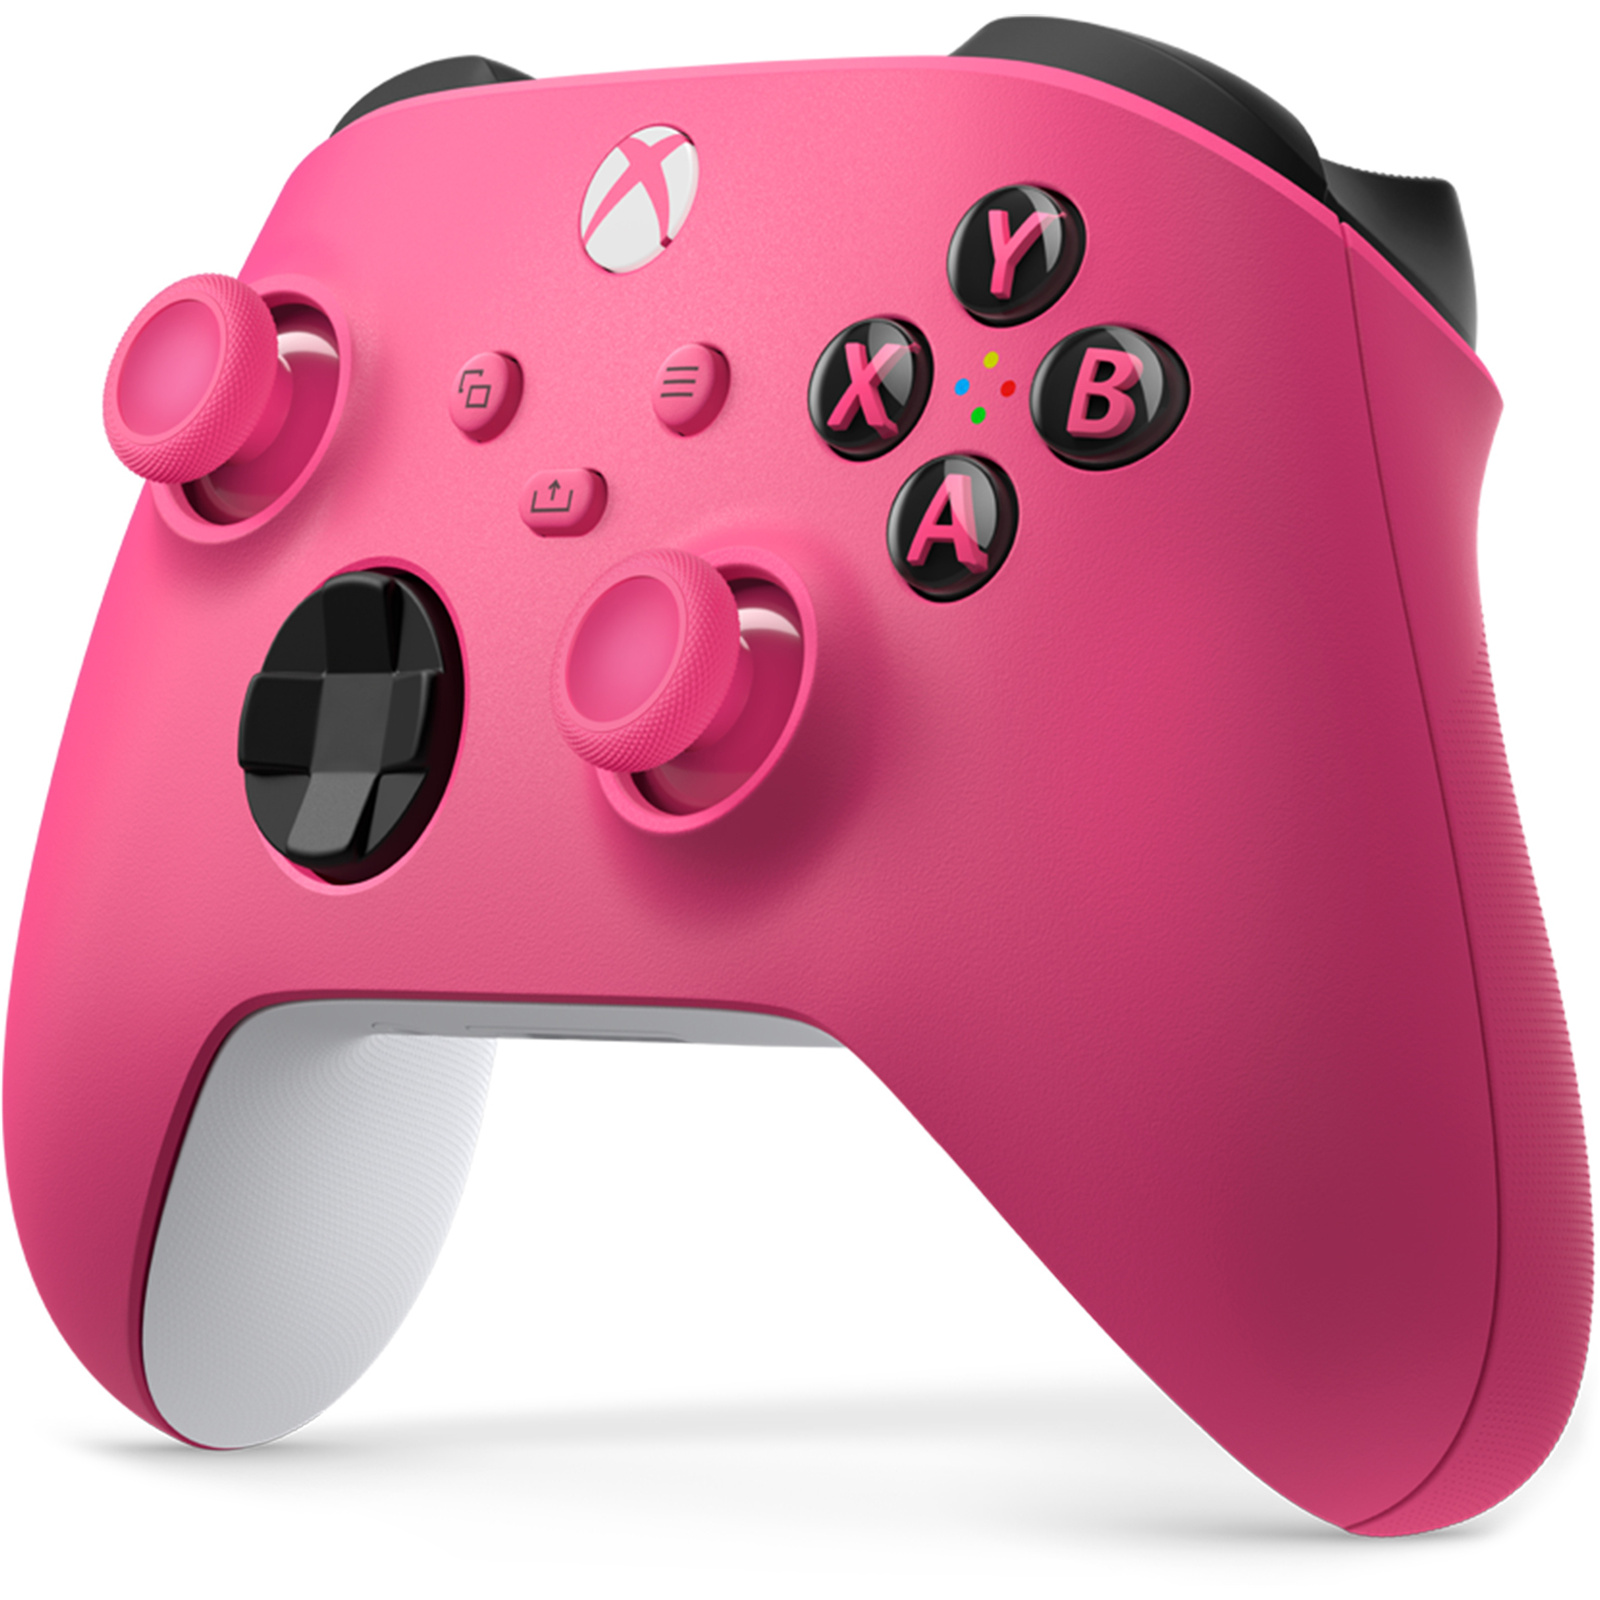 Buy the Microsoft Xbox Wireless Controller - Deep Pink for Xbox Series X/S,...  ( QAU-00084 ) online - PBTech.com/au